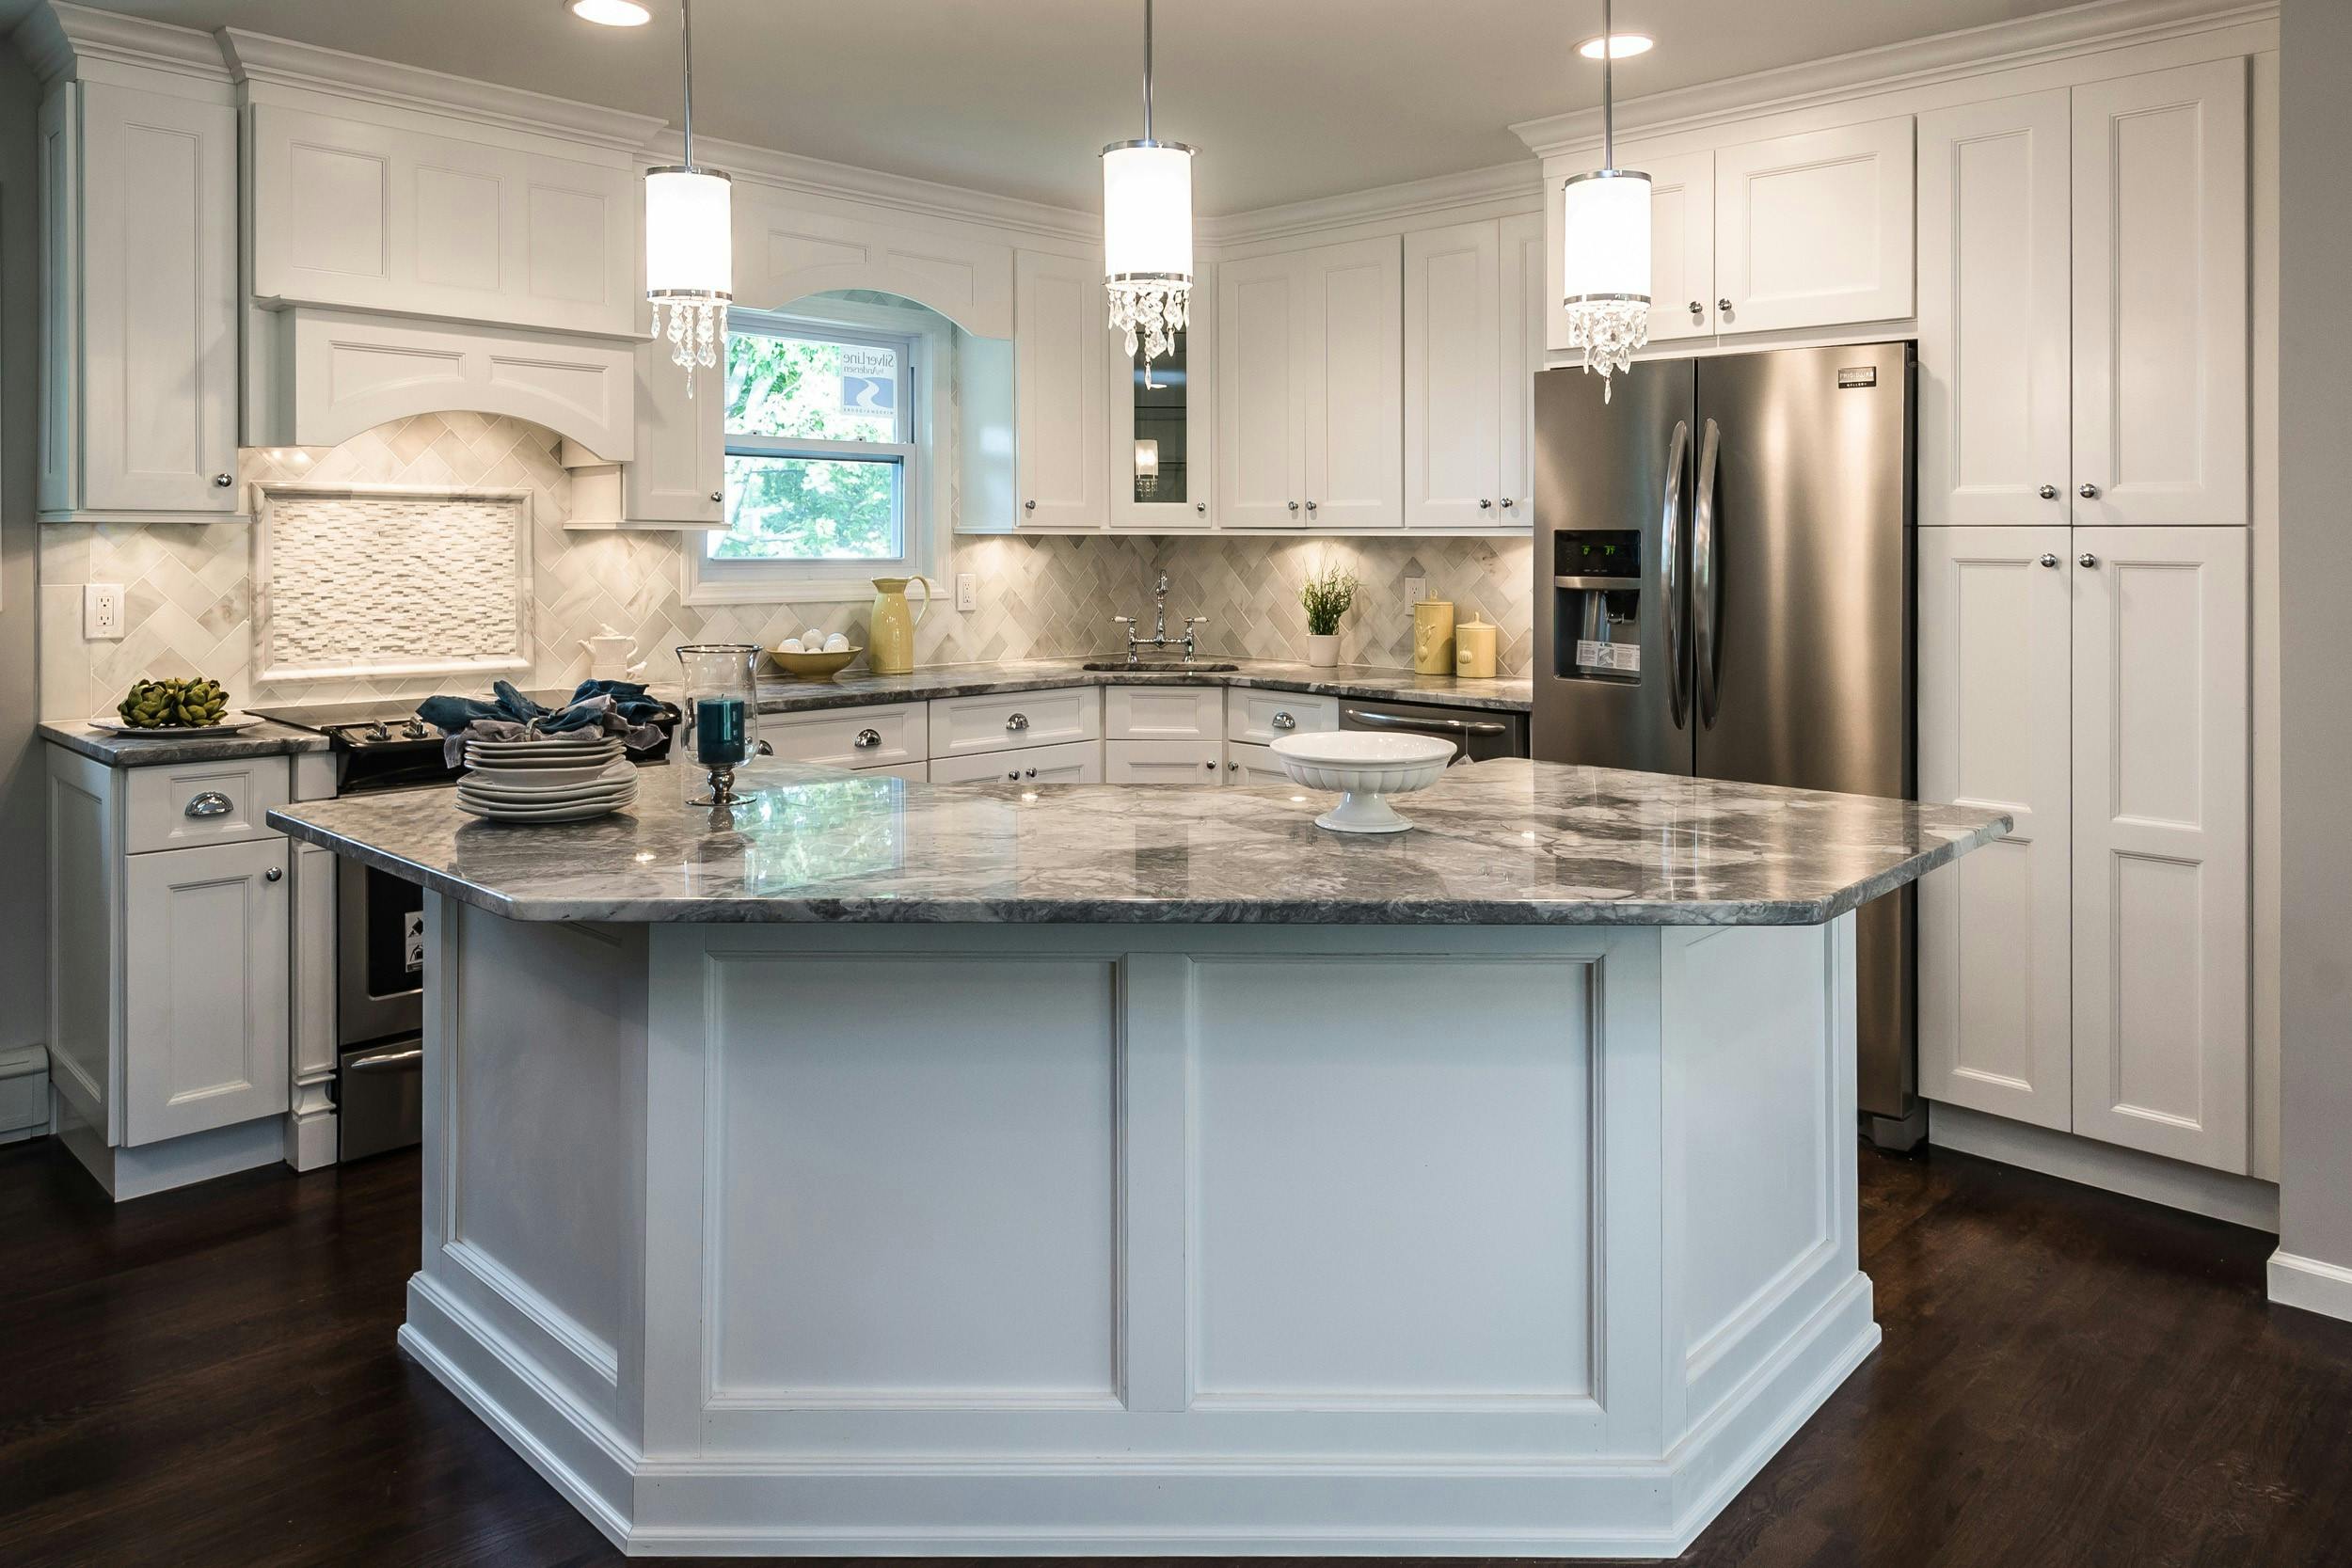 Kitchen Countertops And Cabinets, What Color Countertops Go Good With Grey Cabinets